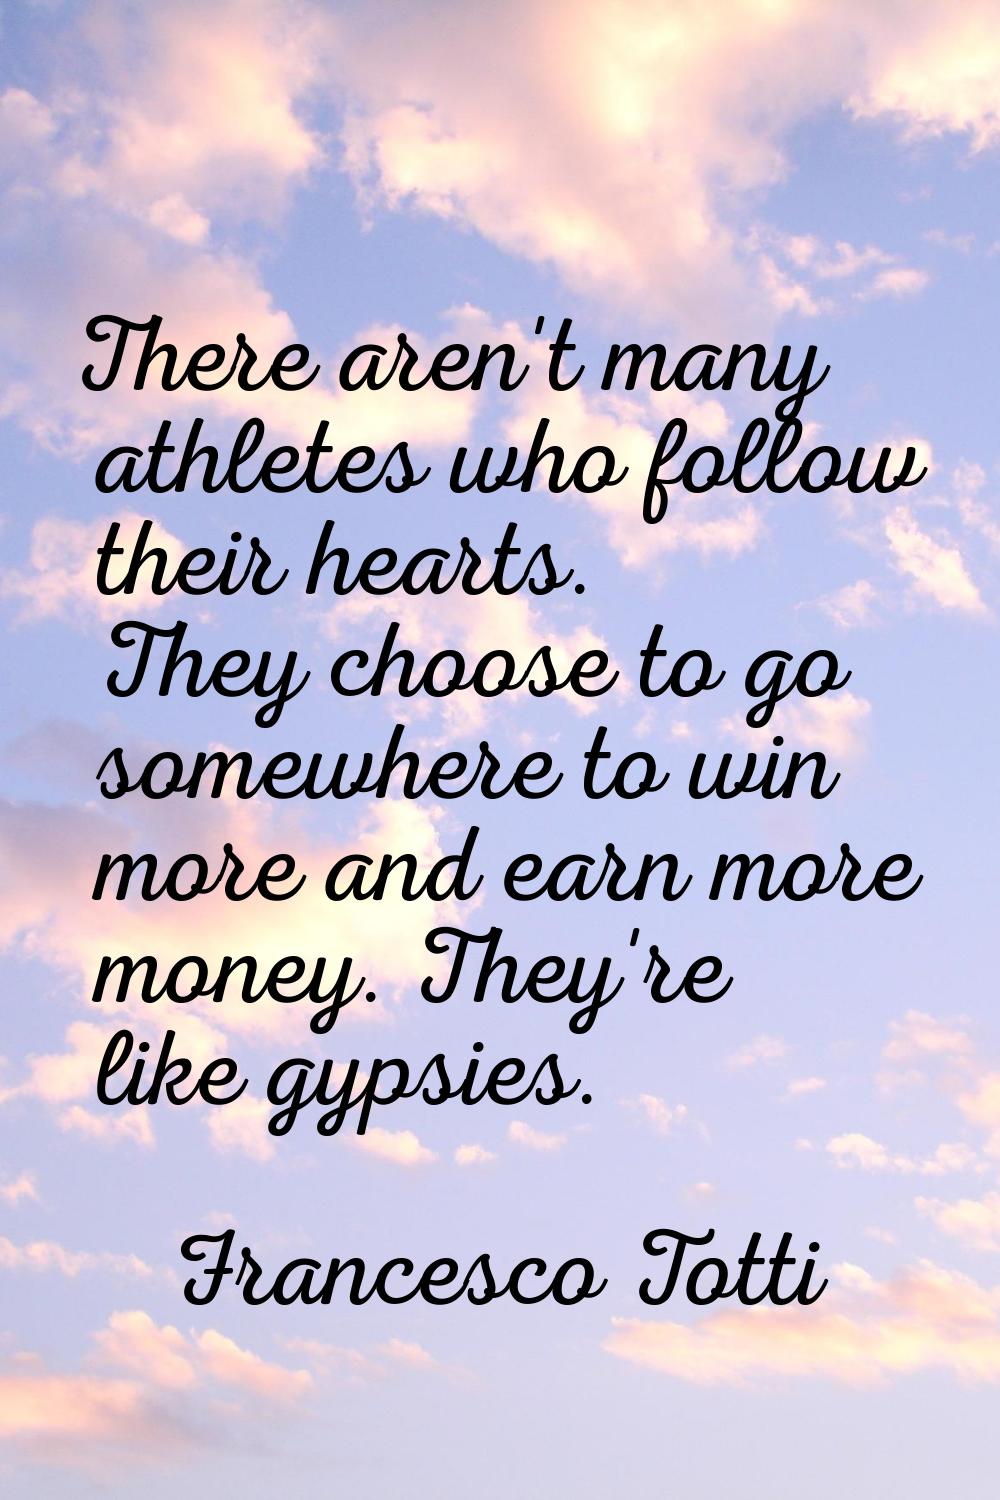 There aren't many athletes who follow their hearts. They choose to go somewhere to win more and ear